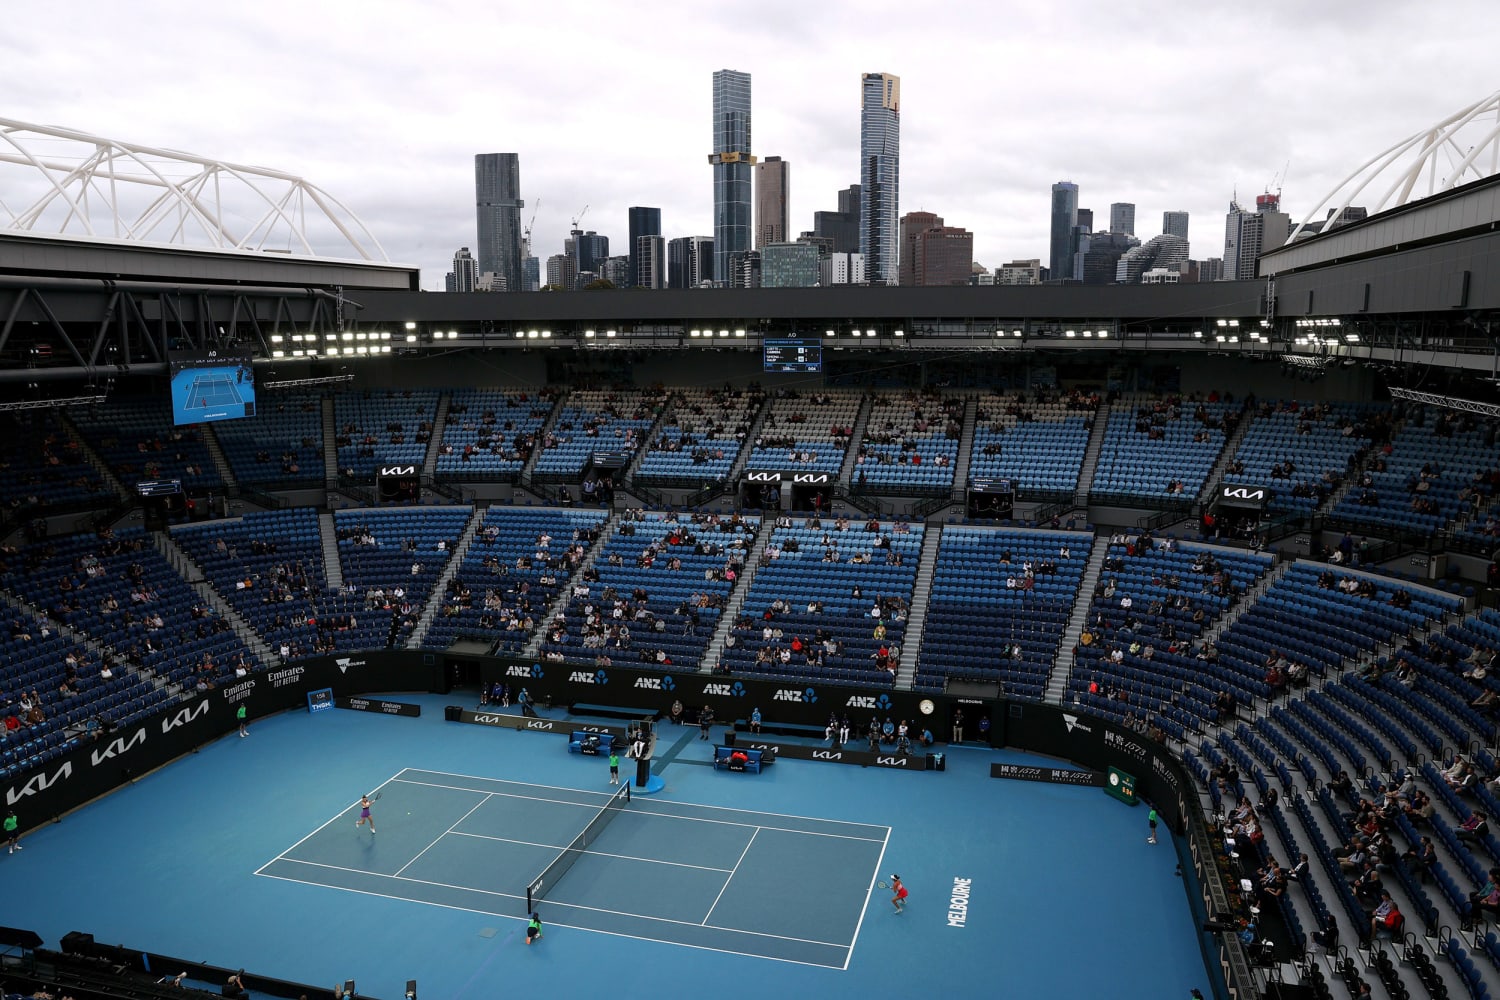 Australian gets underway with tennis fans courtside, world adjusts to Covid